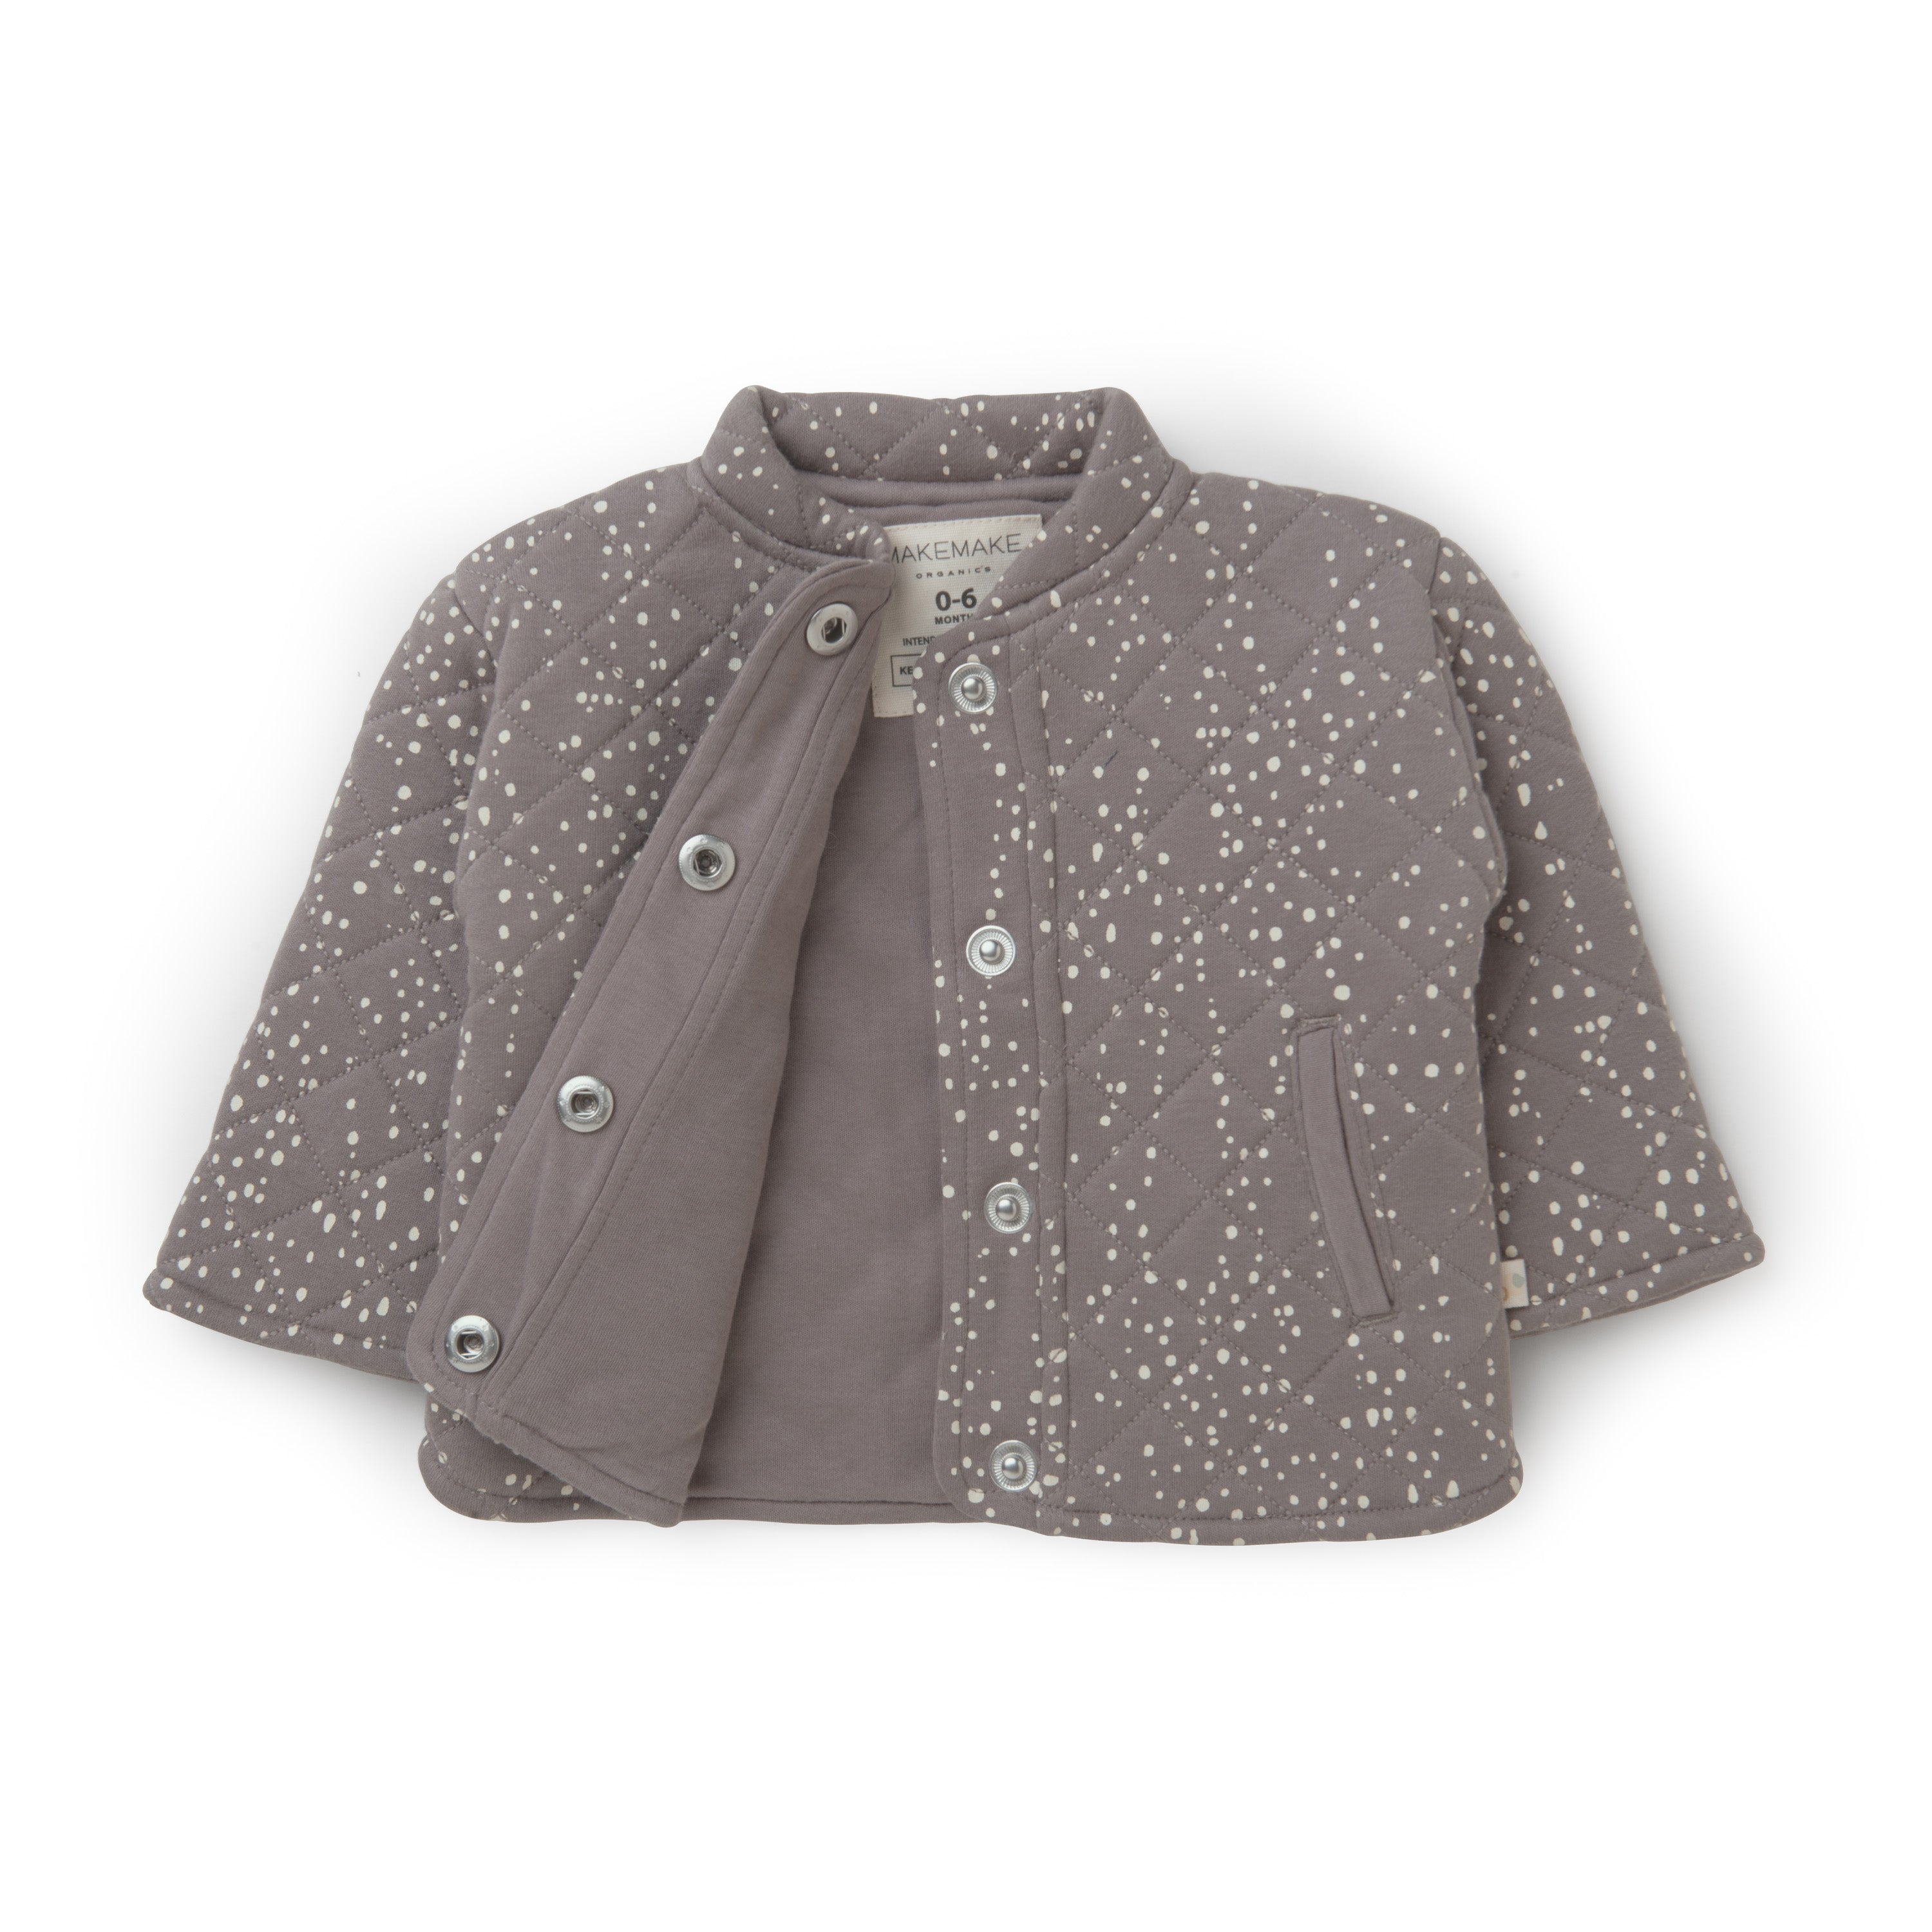 A gray toddler's jacket from Organic Kids with white polka dots, featuring a round neckline, silver snap buttons, and a small pocket on the left side, displayed against a white background